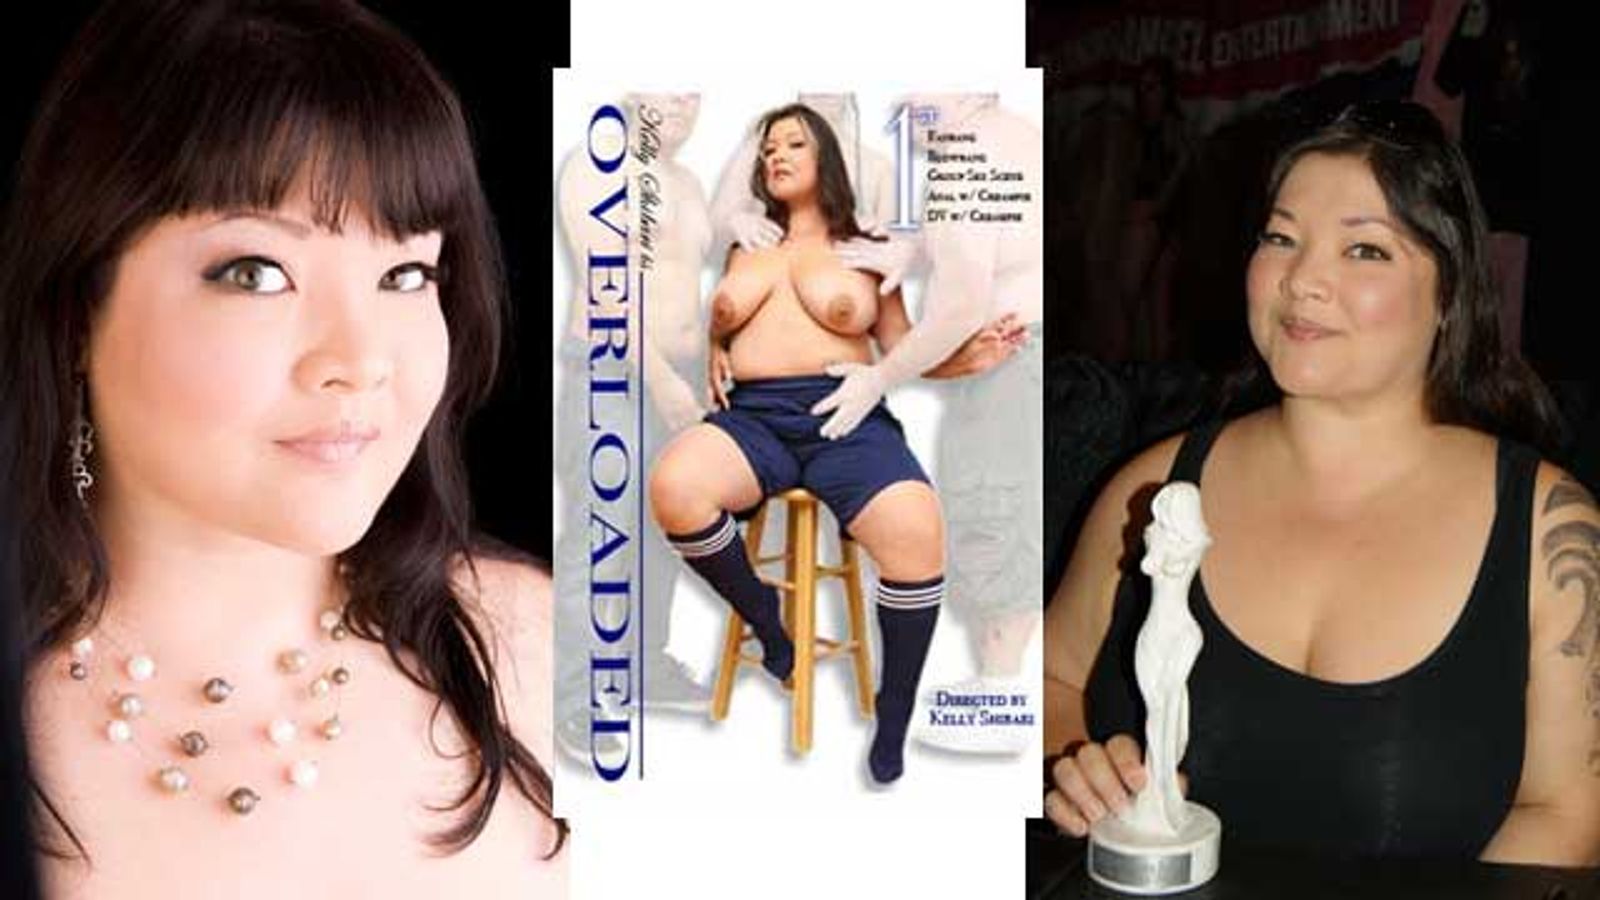 Kelly Shibari to Appear at FetishCon This Weekend, August 16-18